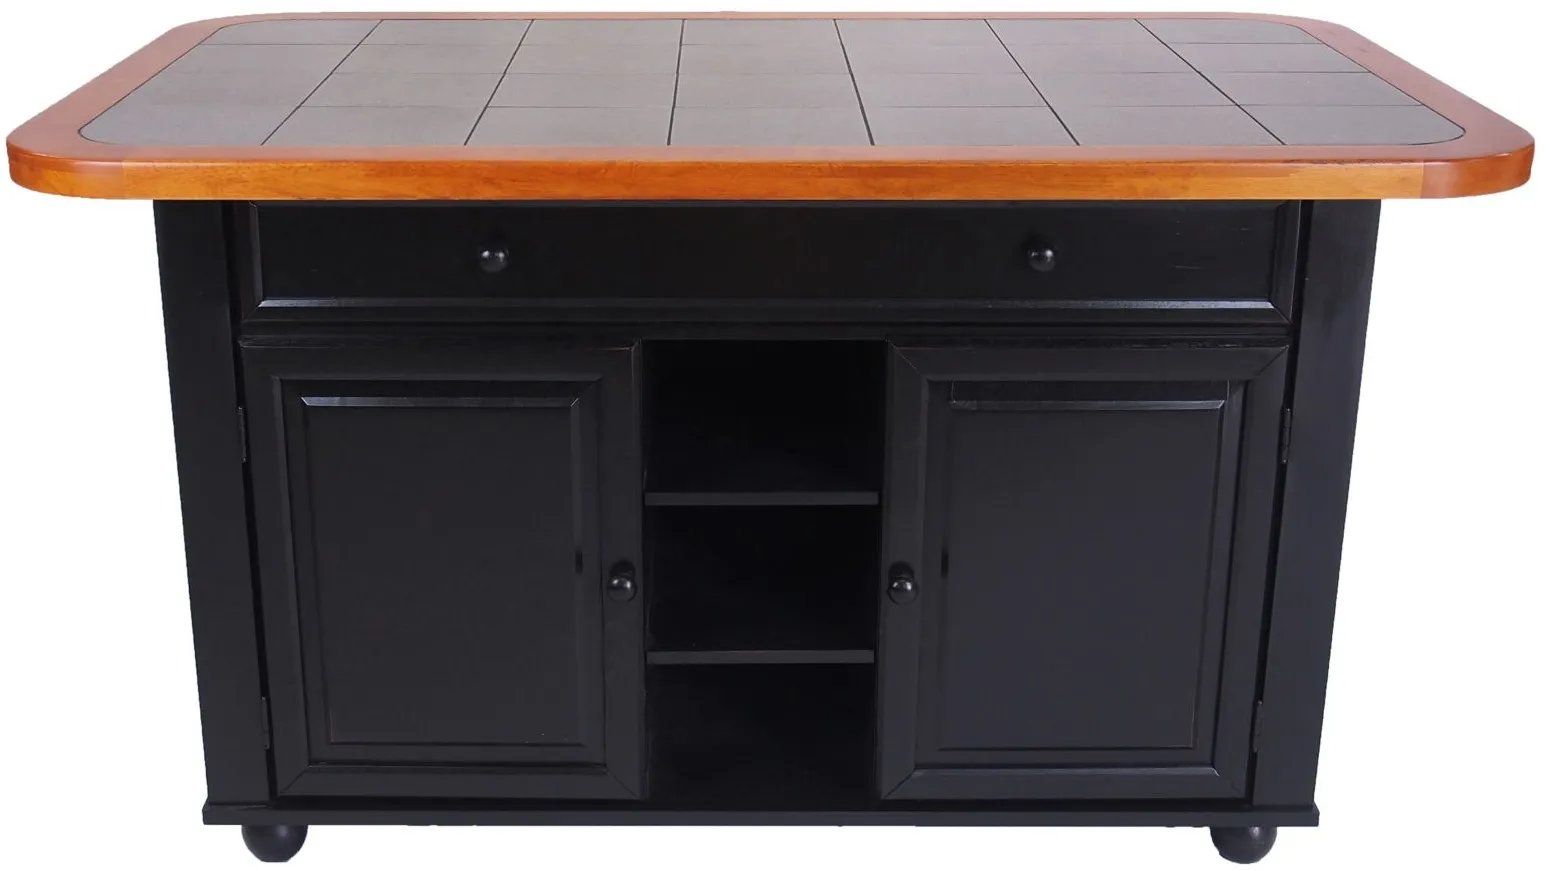 Black Cherry Selections Kitchen Island in Black Cherry by Sunset Trading